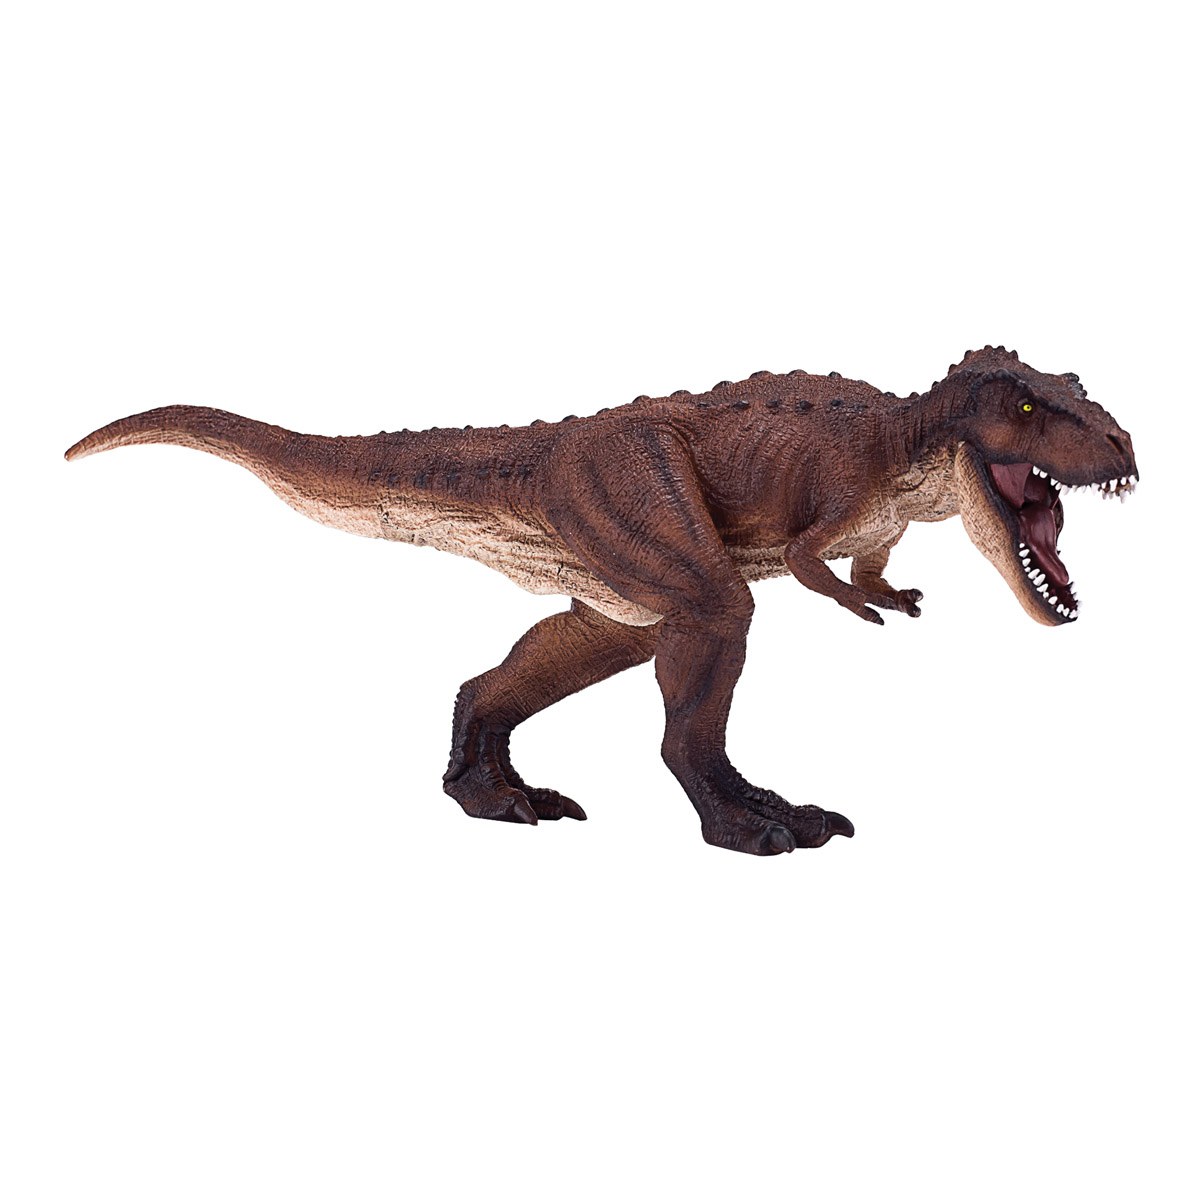 Mojo Prehistoric Deluxe T Rex with Articulated Jaw Dinosaur Figure